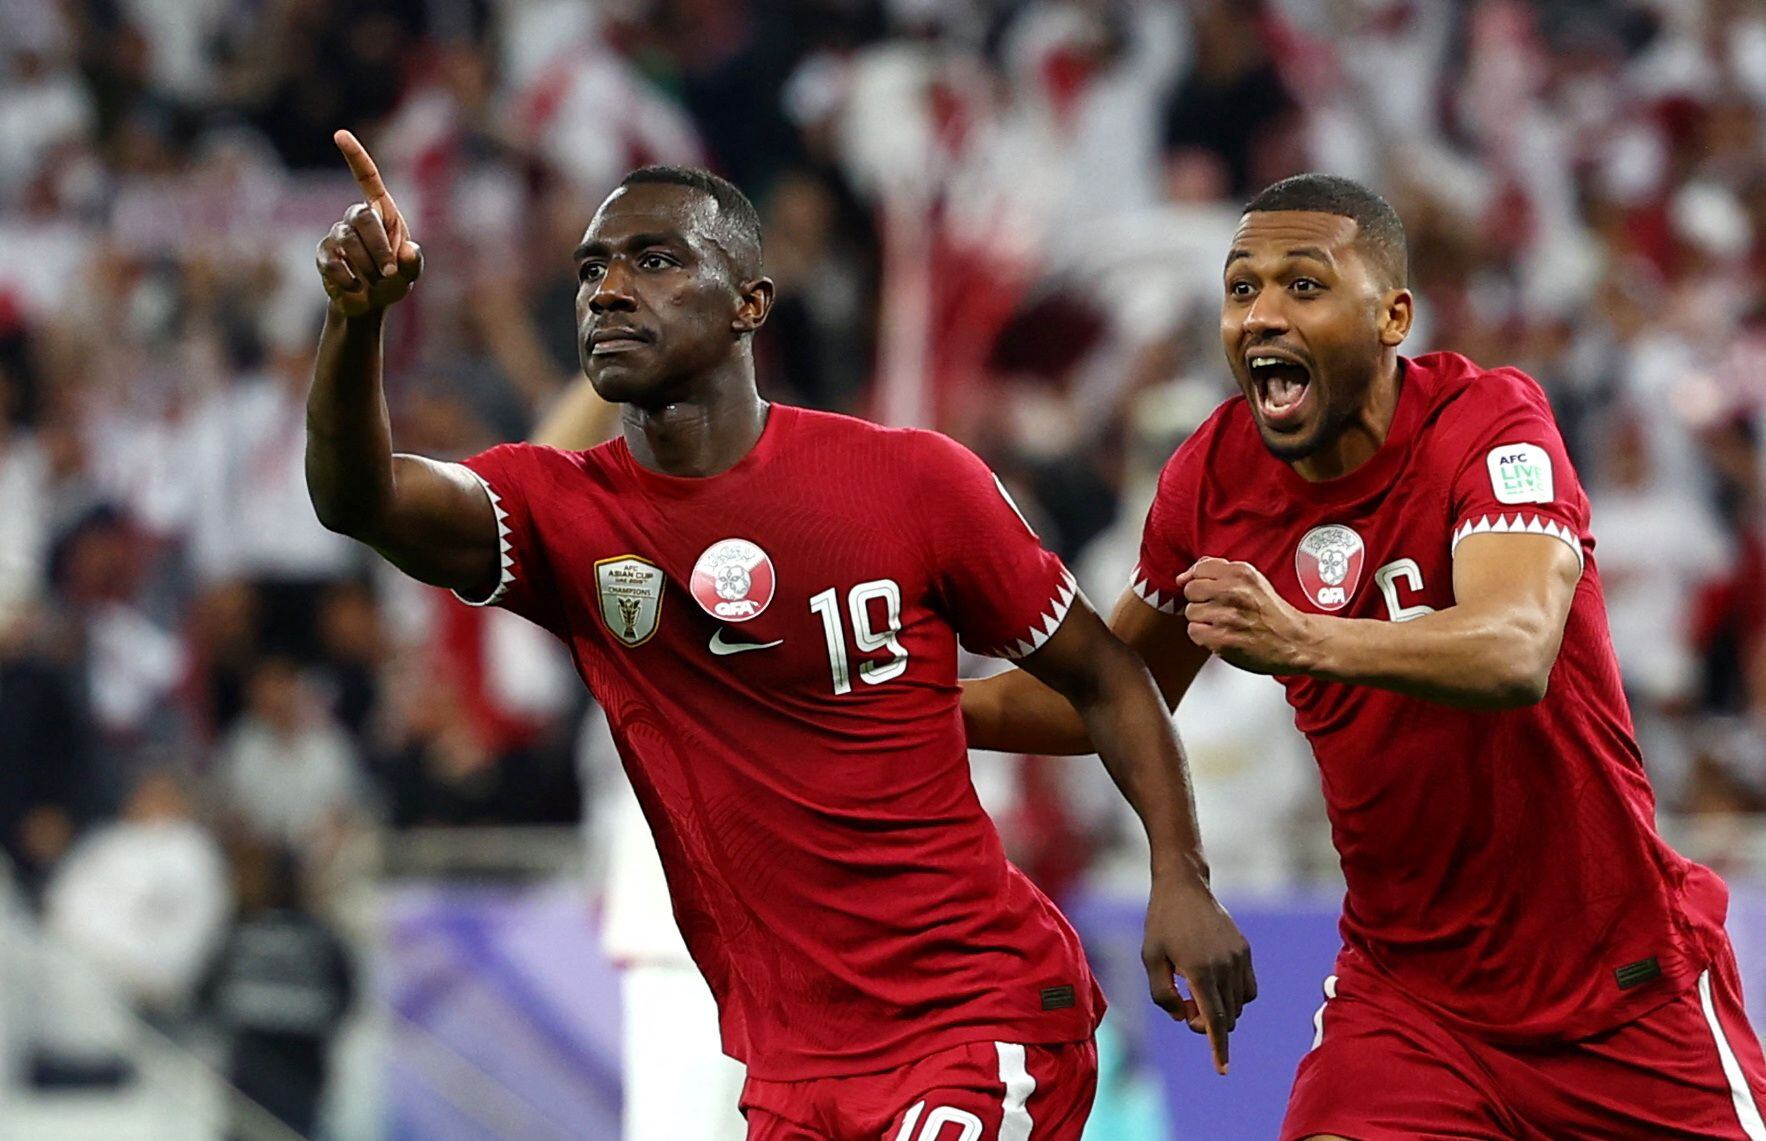 jordan and qatar put friendships aside to battle for asian football's ultimate prize